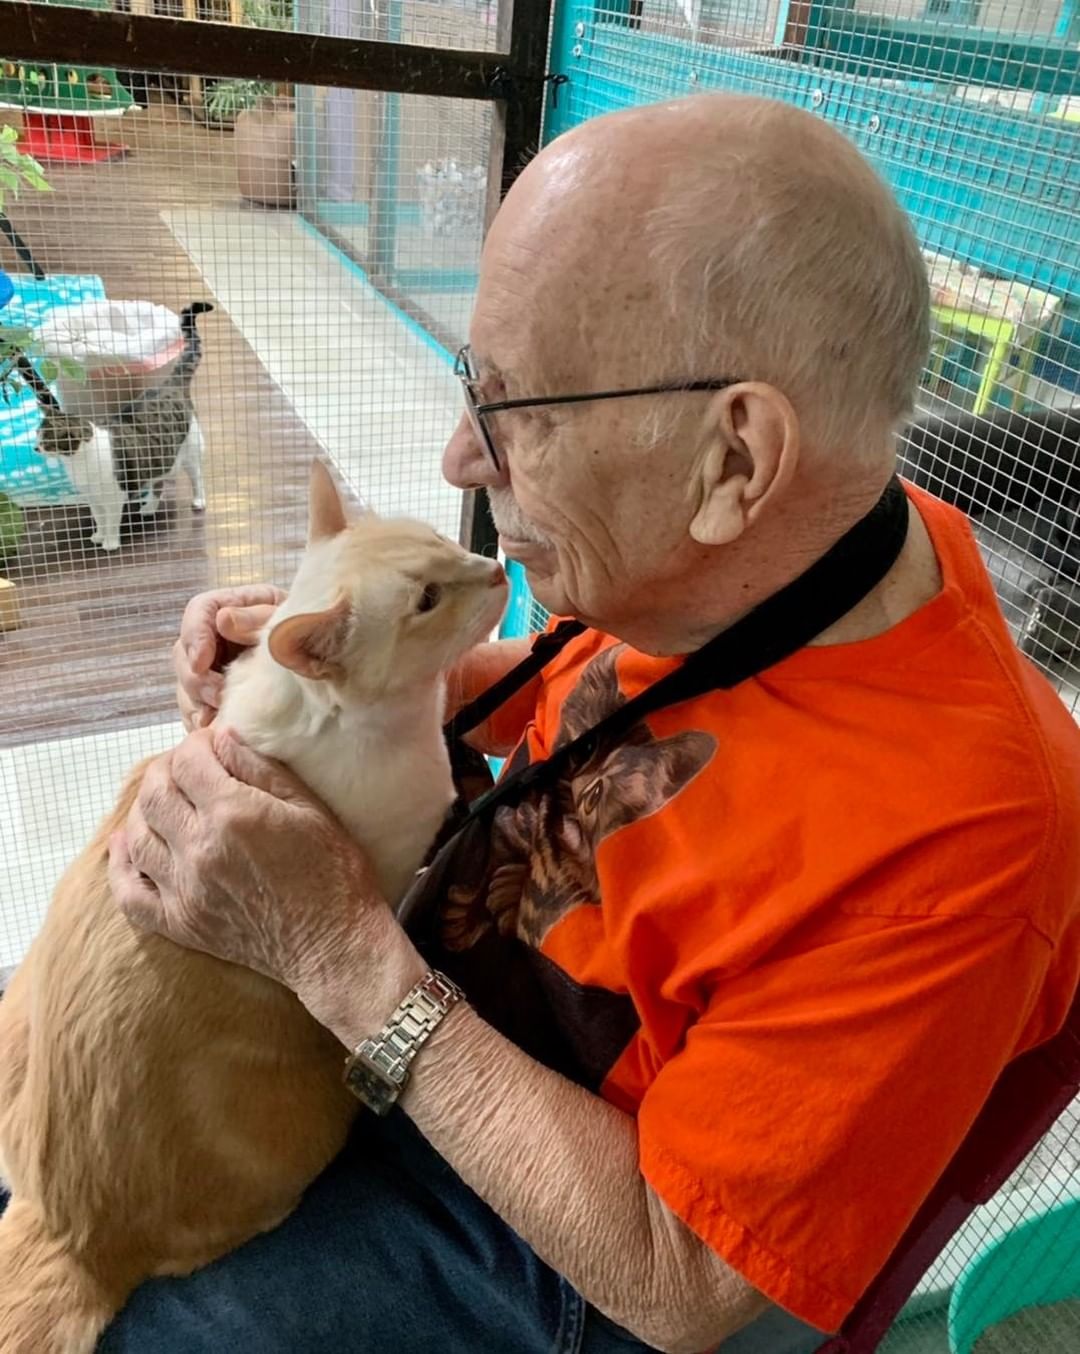 Today we wanted to highlight the importance of volunteers. 

Did you know that RSQ is run 100% by a team of volunteers? We have zero paid employees and the work we do is truly a labor of love. 

We have approx 70 active volunteers who take turns working morning and evening shifts to care for over 100 animals at our adoption center. We have volunteers from age 18- 88. 
From all different backgrounds and walks of life. And everyone brings different ideas and experience to the table. 

Meet Larry! 

Larry is 86 years young and he volunteers his time to sit with the cats and give them love and attention. He also loves to take pictures of the cats and he ALWAYS dresses in his finest Cat shirts for the occasion. 😃 

We are grateful for the hundreds of hours per week that our amazing volunteers put in every week to care for our animals. If you are interested in joining our volunteer team, please fill out a volunteer application through our website. 

rsqutah.org

<a target='_blank' href='https://www.instagram.com/explore/tags/CatMan/'>#CatMan</a>
<a target='_blank' href='https://www.instagram.com/explore/tags/Volunteer/'>#Volunteer</a>
<a target='_blank' href='https://www.instagram.com/explore/tags/RuralRescue/'>#RuralRescue</a> 
<a target='_blank' href='https://www.instagram.com/explore/tags/TeamWork/'>#TeamWork</a>